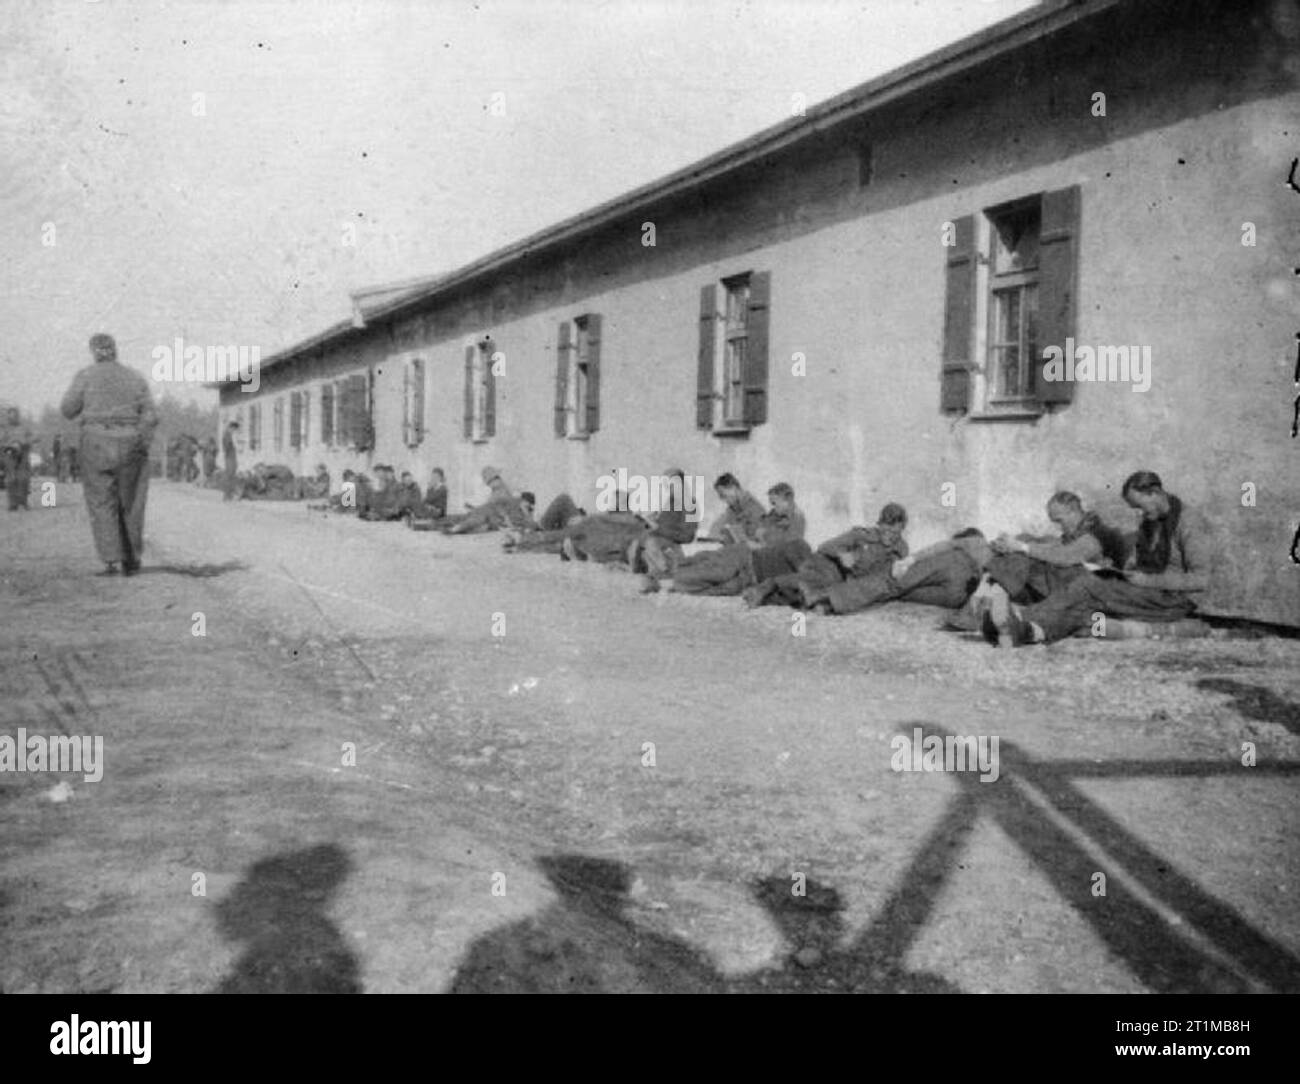 The British Army in North-west Europe 1944-45 A photograph taken covertly at Stalag VIIA at Mooseburg in November 1943, showing British POWs resting by the side of a hut. Stock Photo